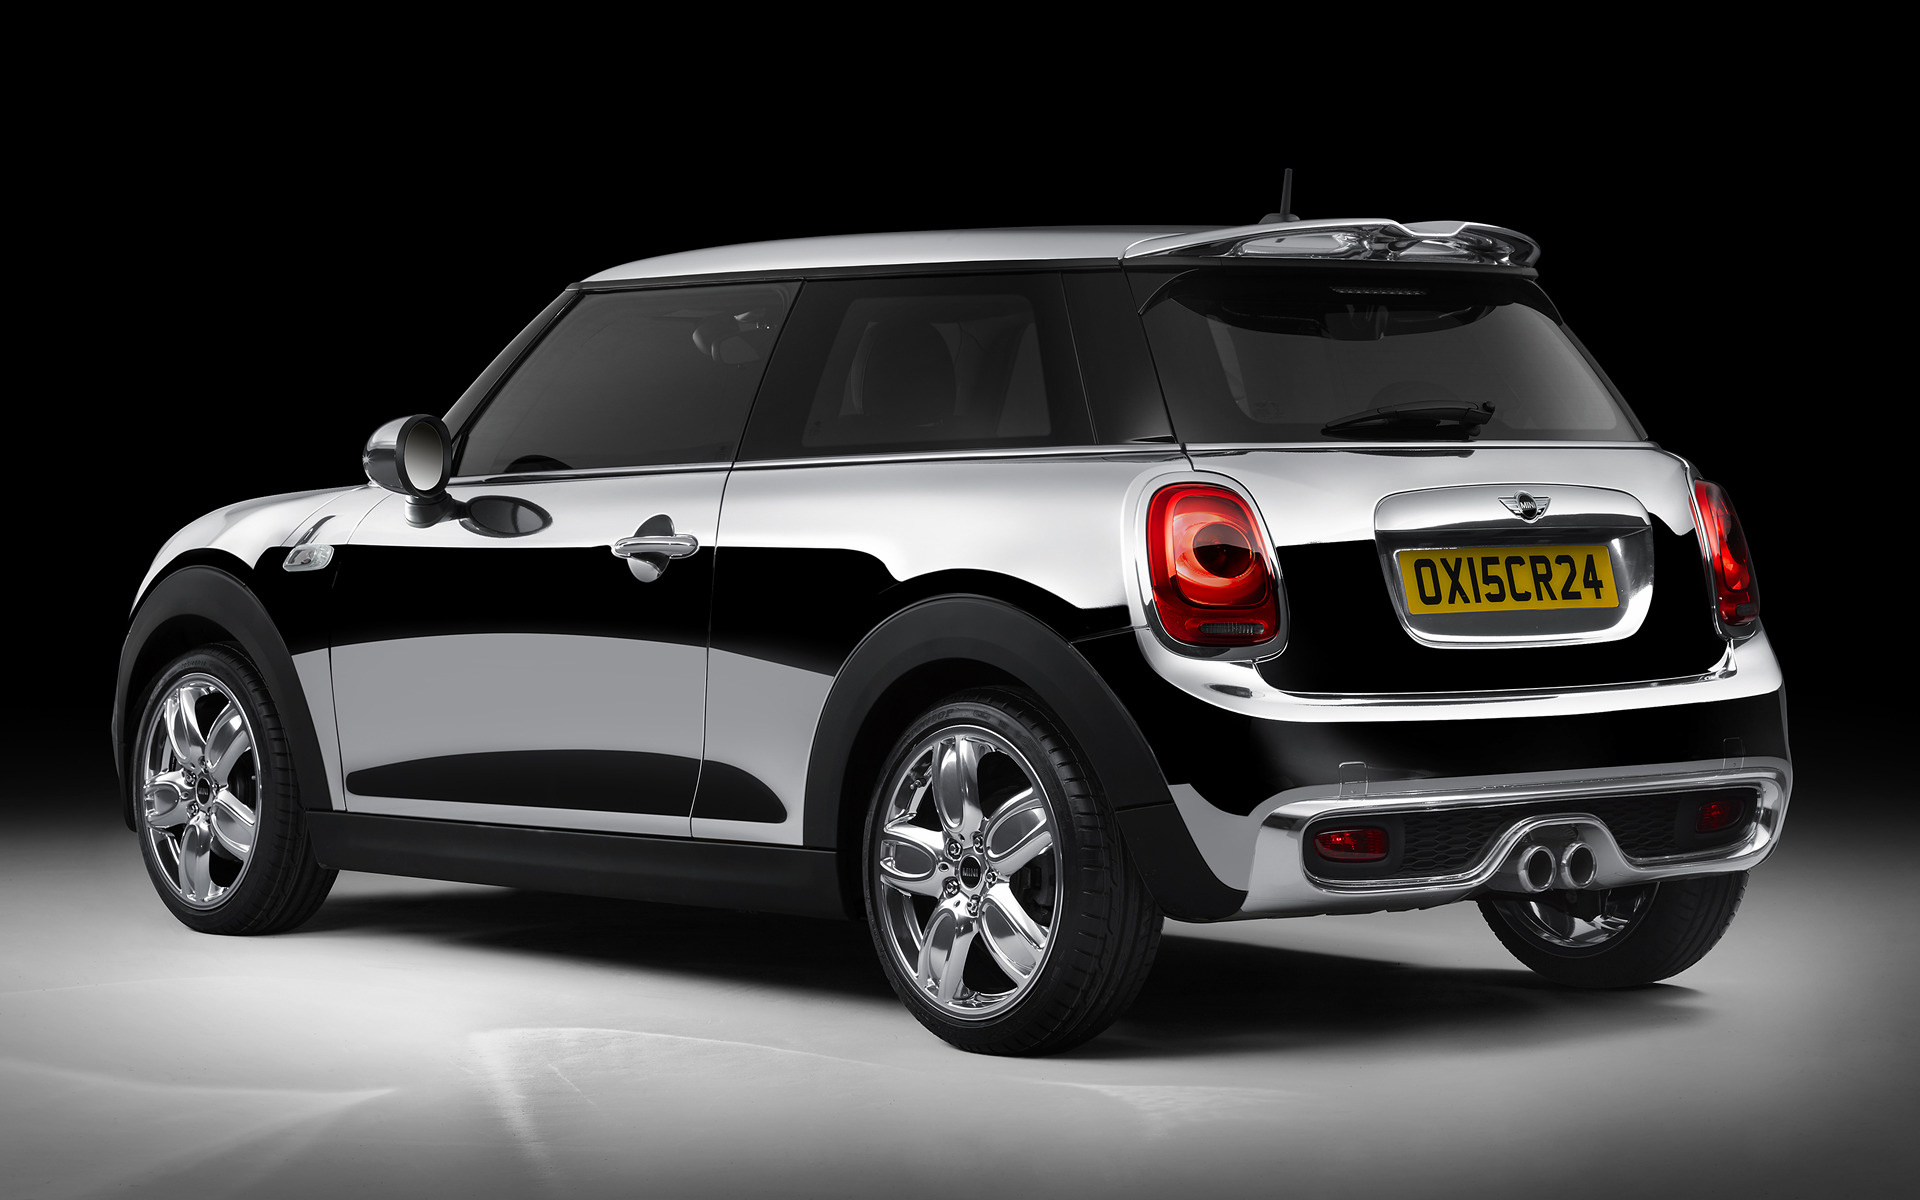 2015 Mini Cooper S Chrome Line Exterior Deluxe Concept - Wallpapers and ...